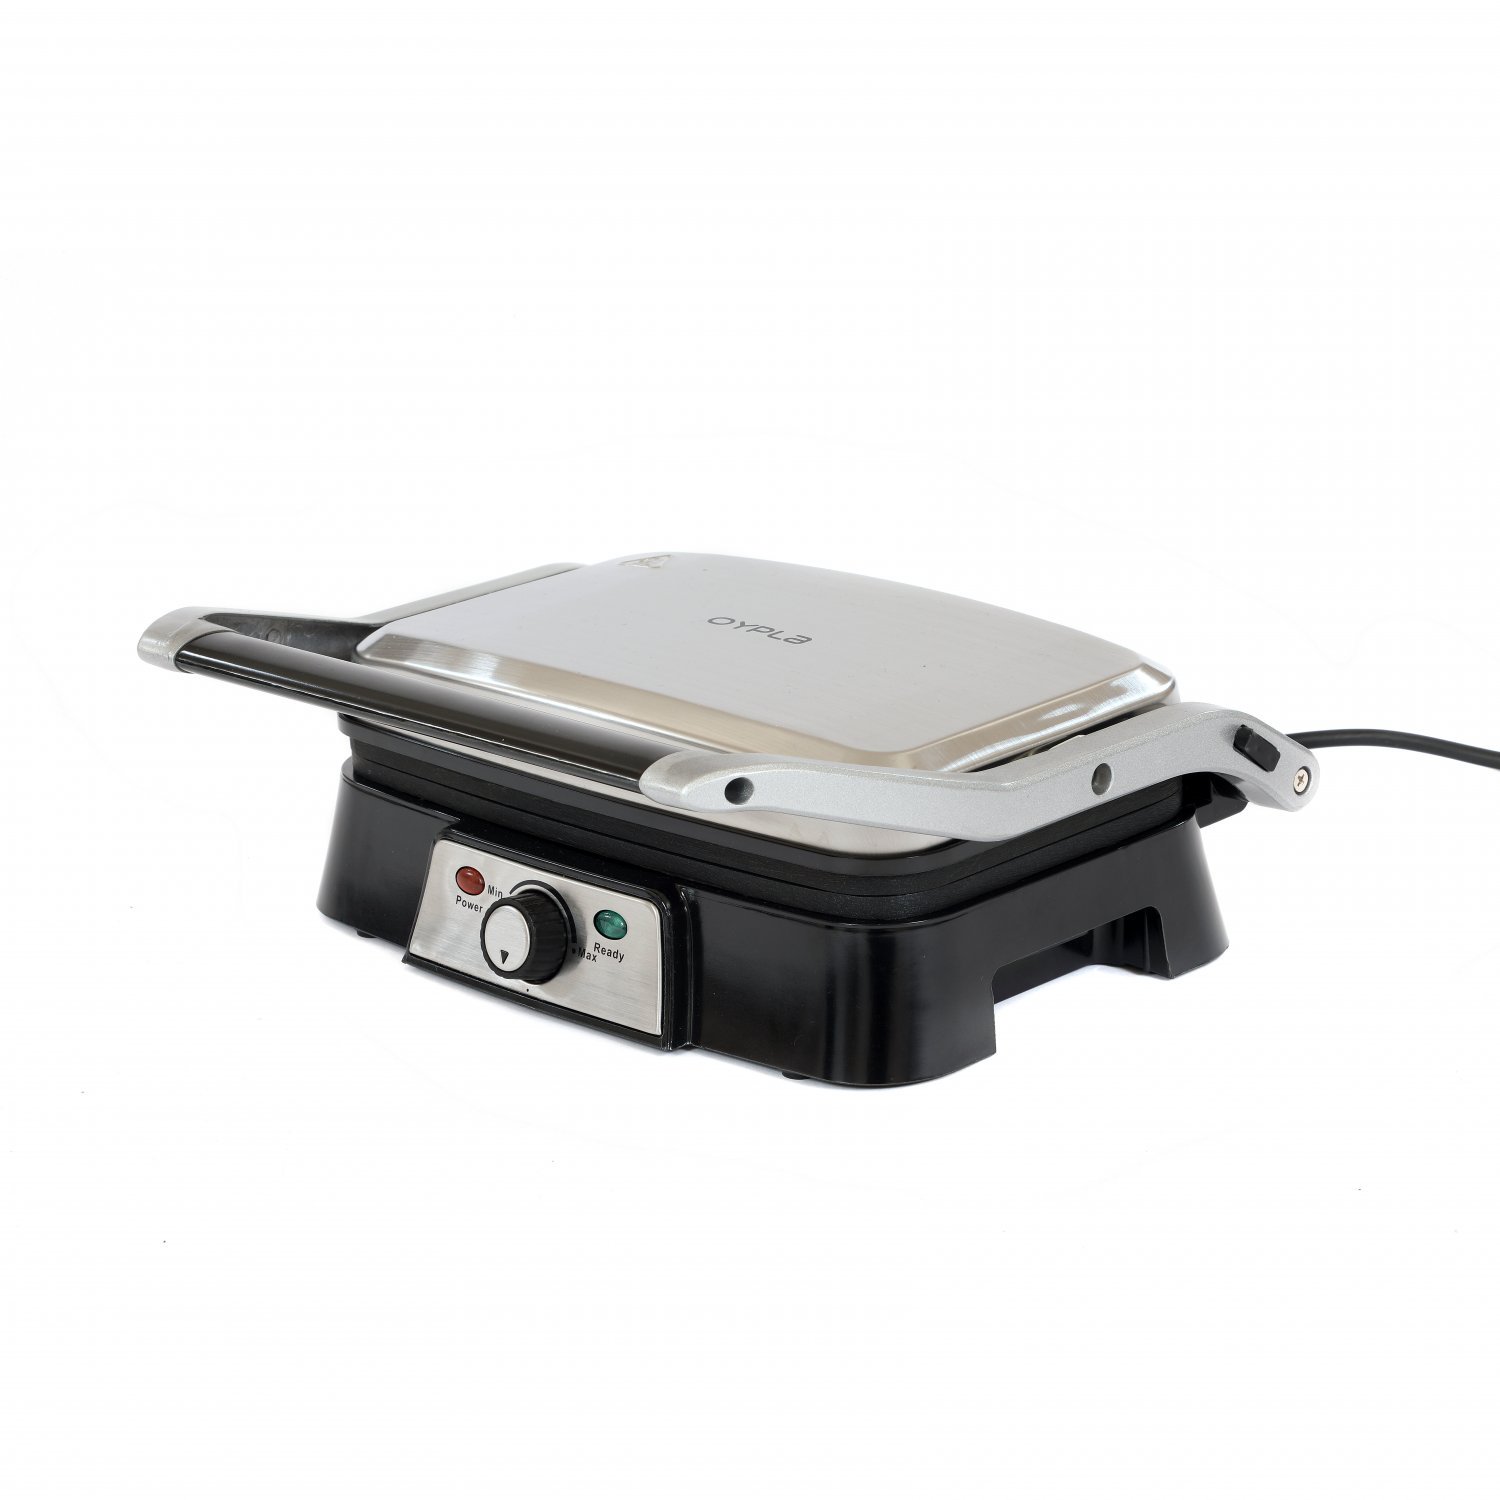 2-in-1 1500W Toasted Sandwich Panini Press and Contact Grill